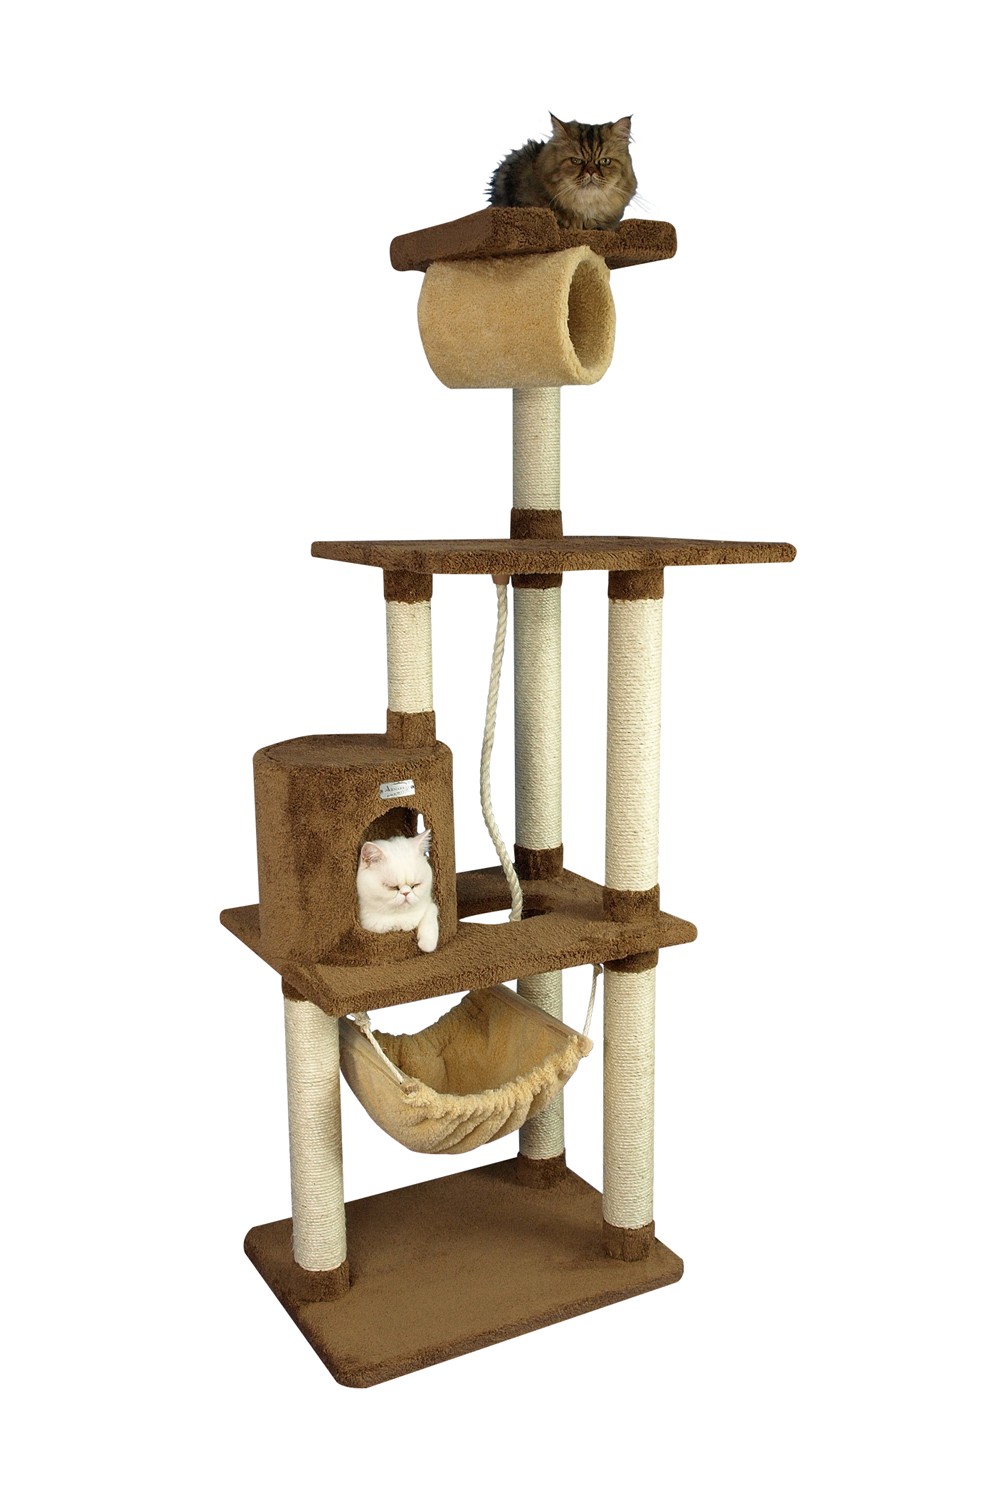 Armarkat 70" Real Wood Cat tree With Scratch posts, Hammock for Cats & Kittens, X7001